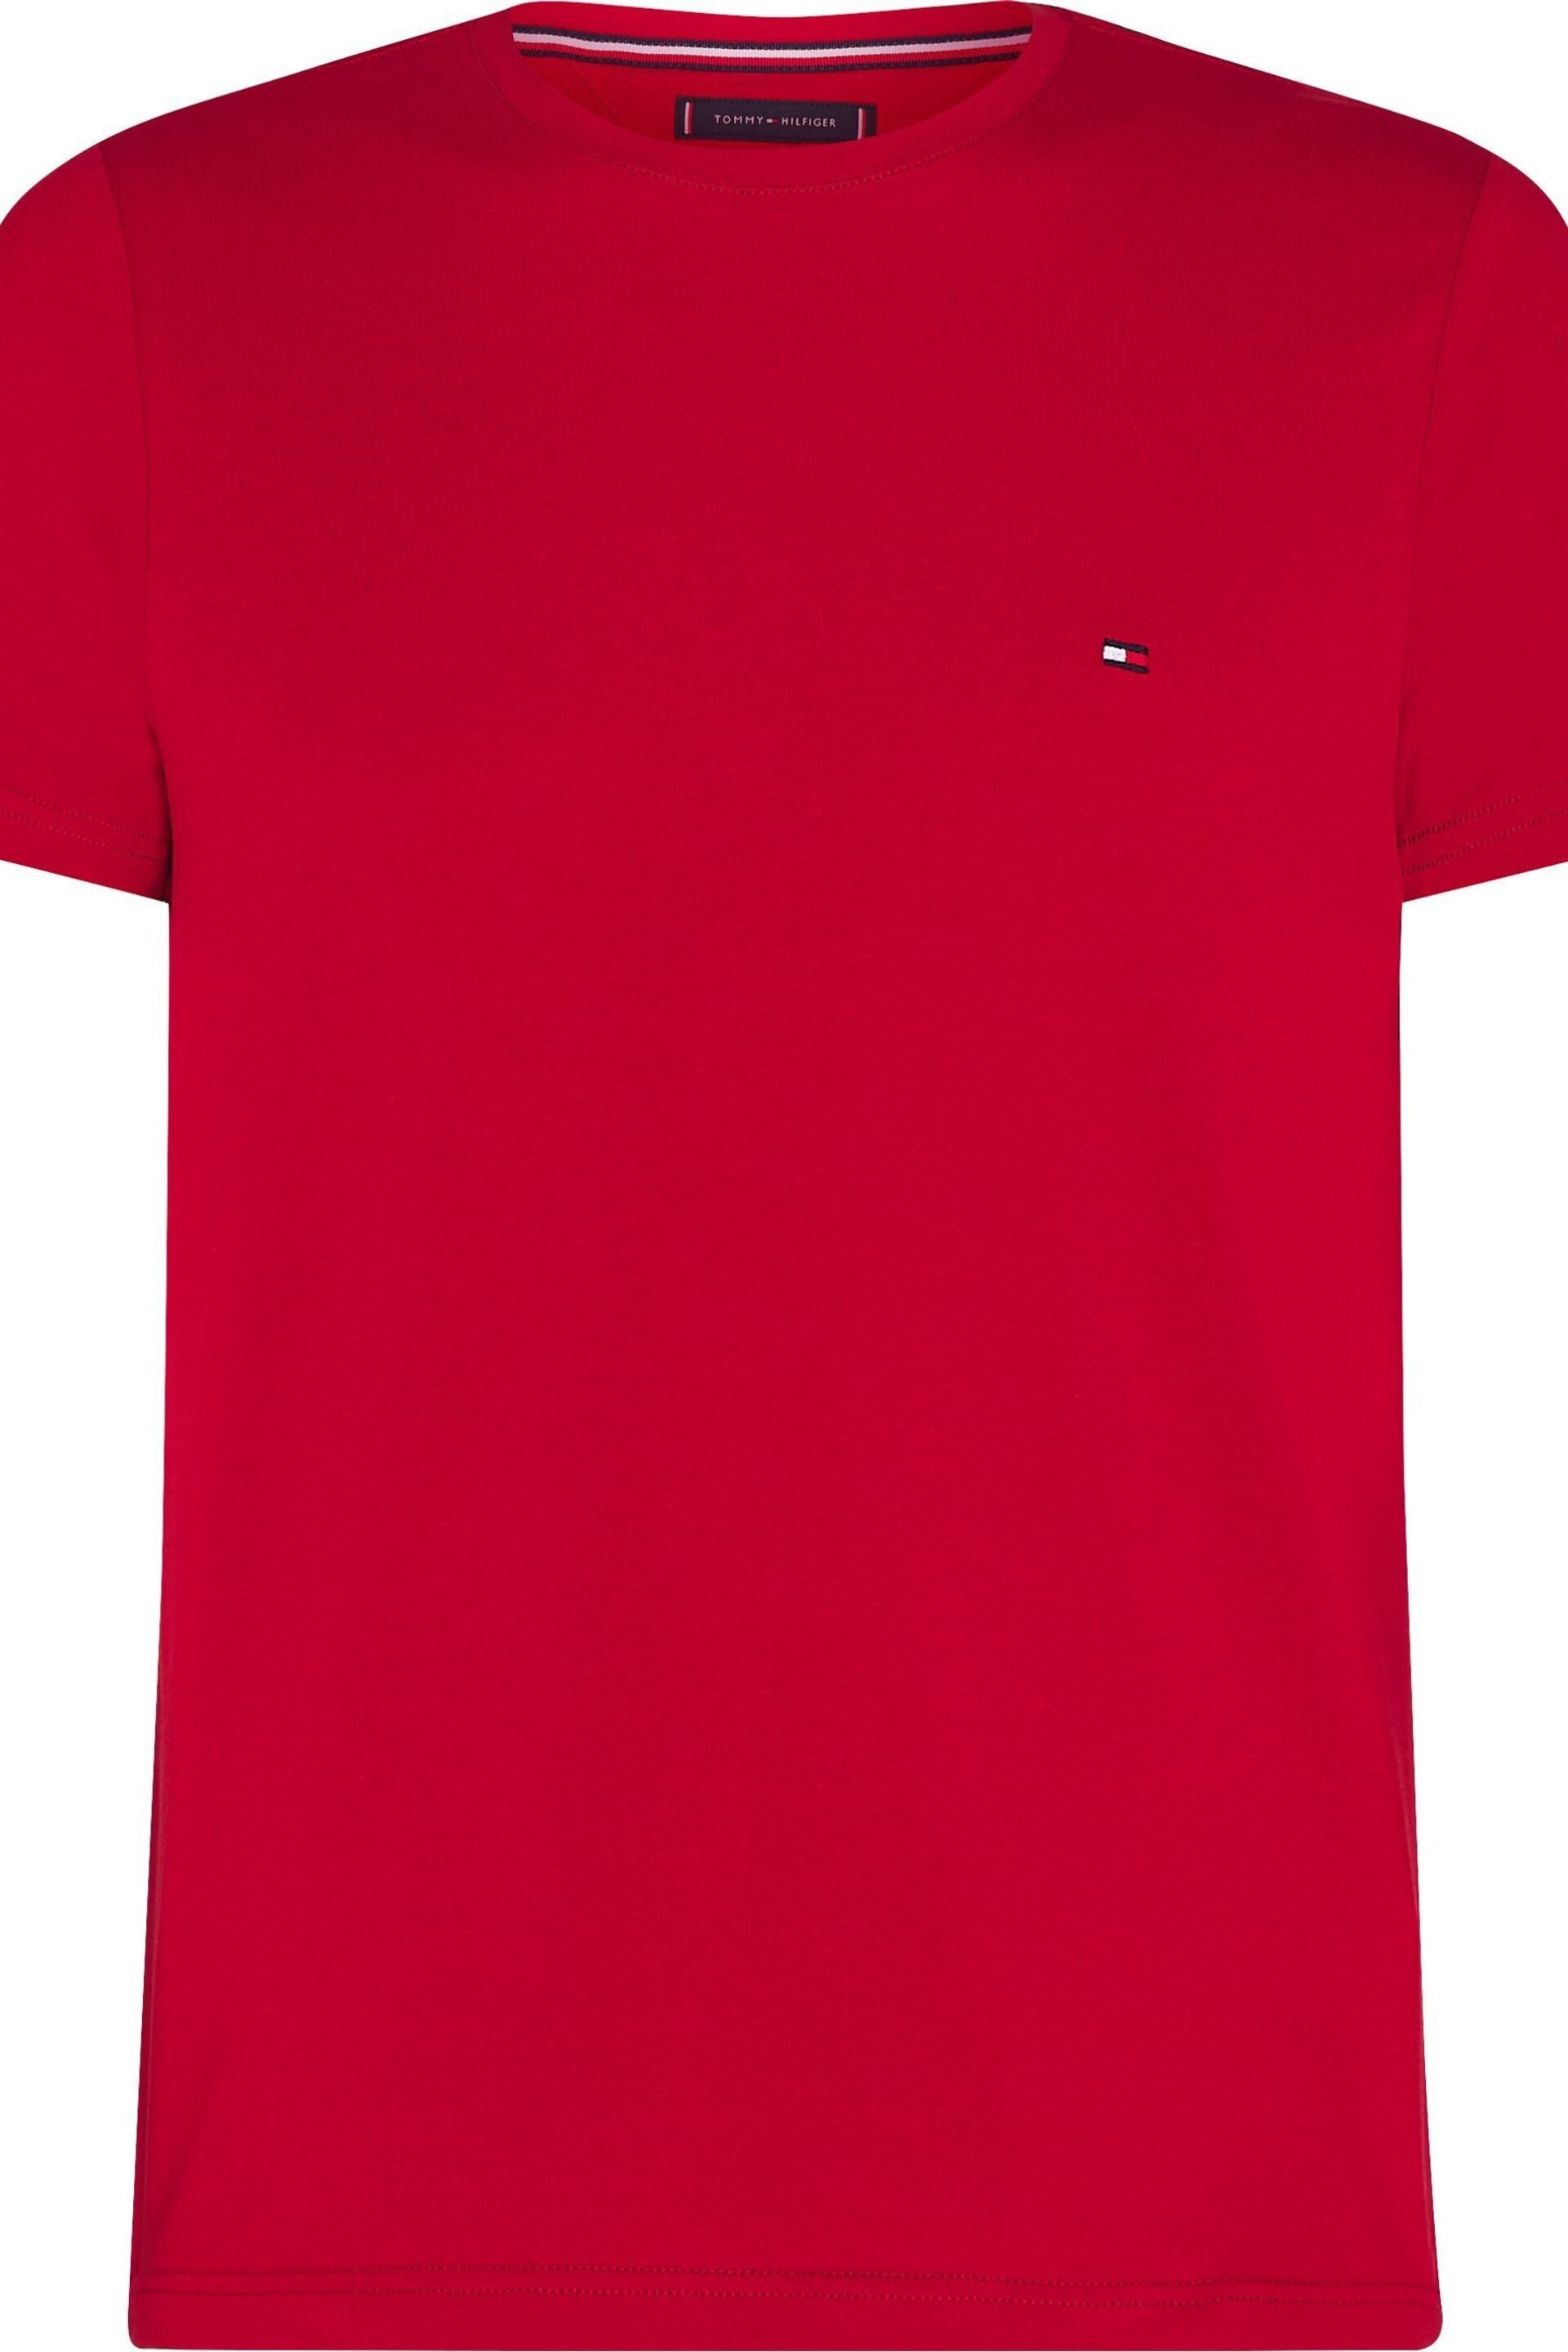 Tommy Hilfiger Core Stretch Slim Fit Crew Neck T-Shirt - Image 3 of 6